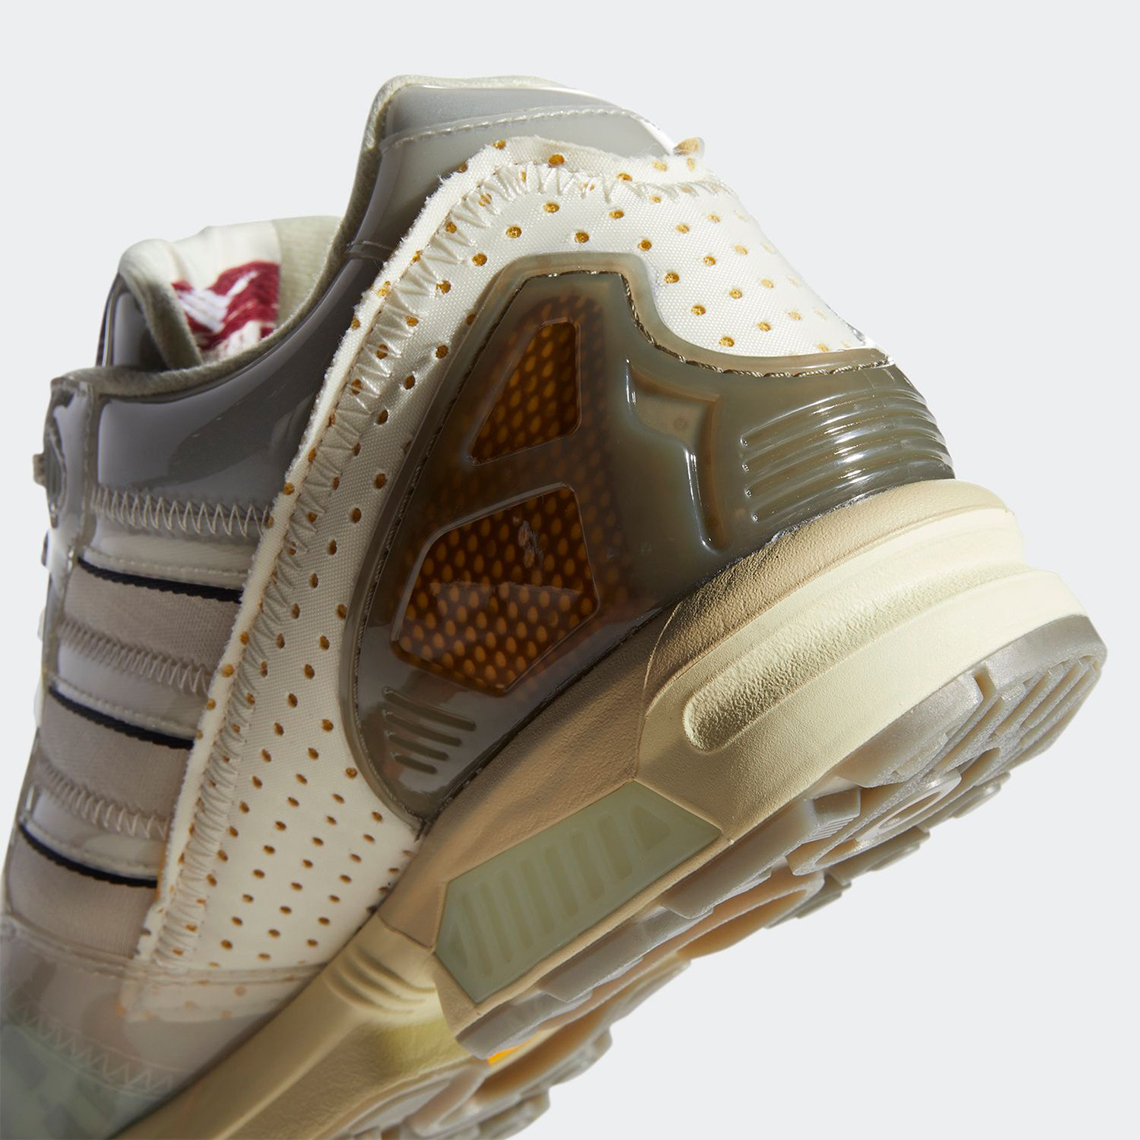 adidas ZX 6000 Inside Out G55409 Release Date | SneakerNews.com